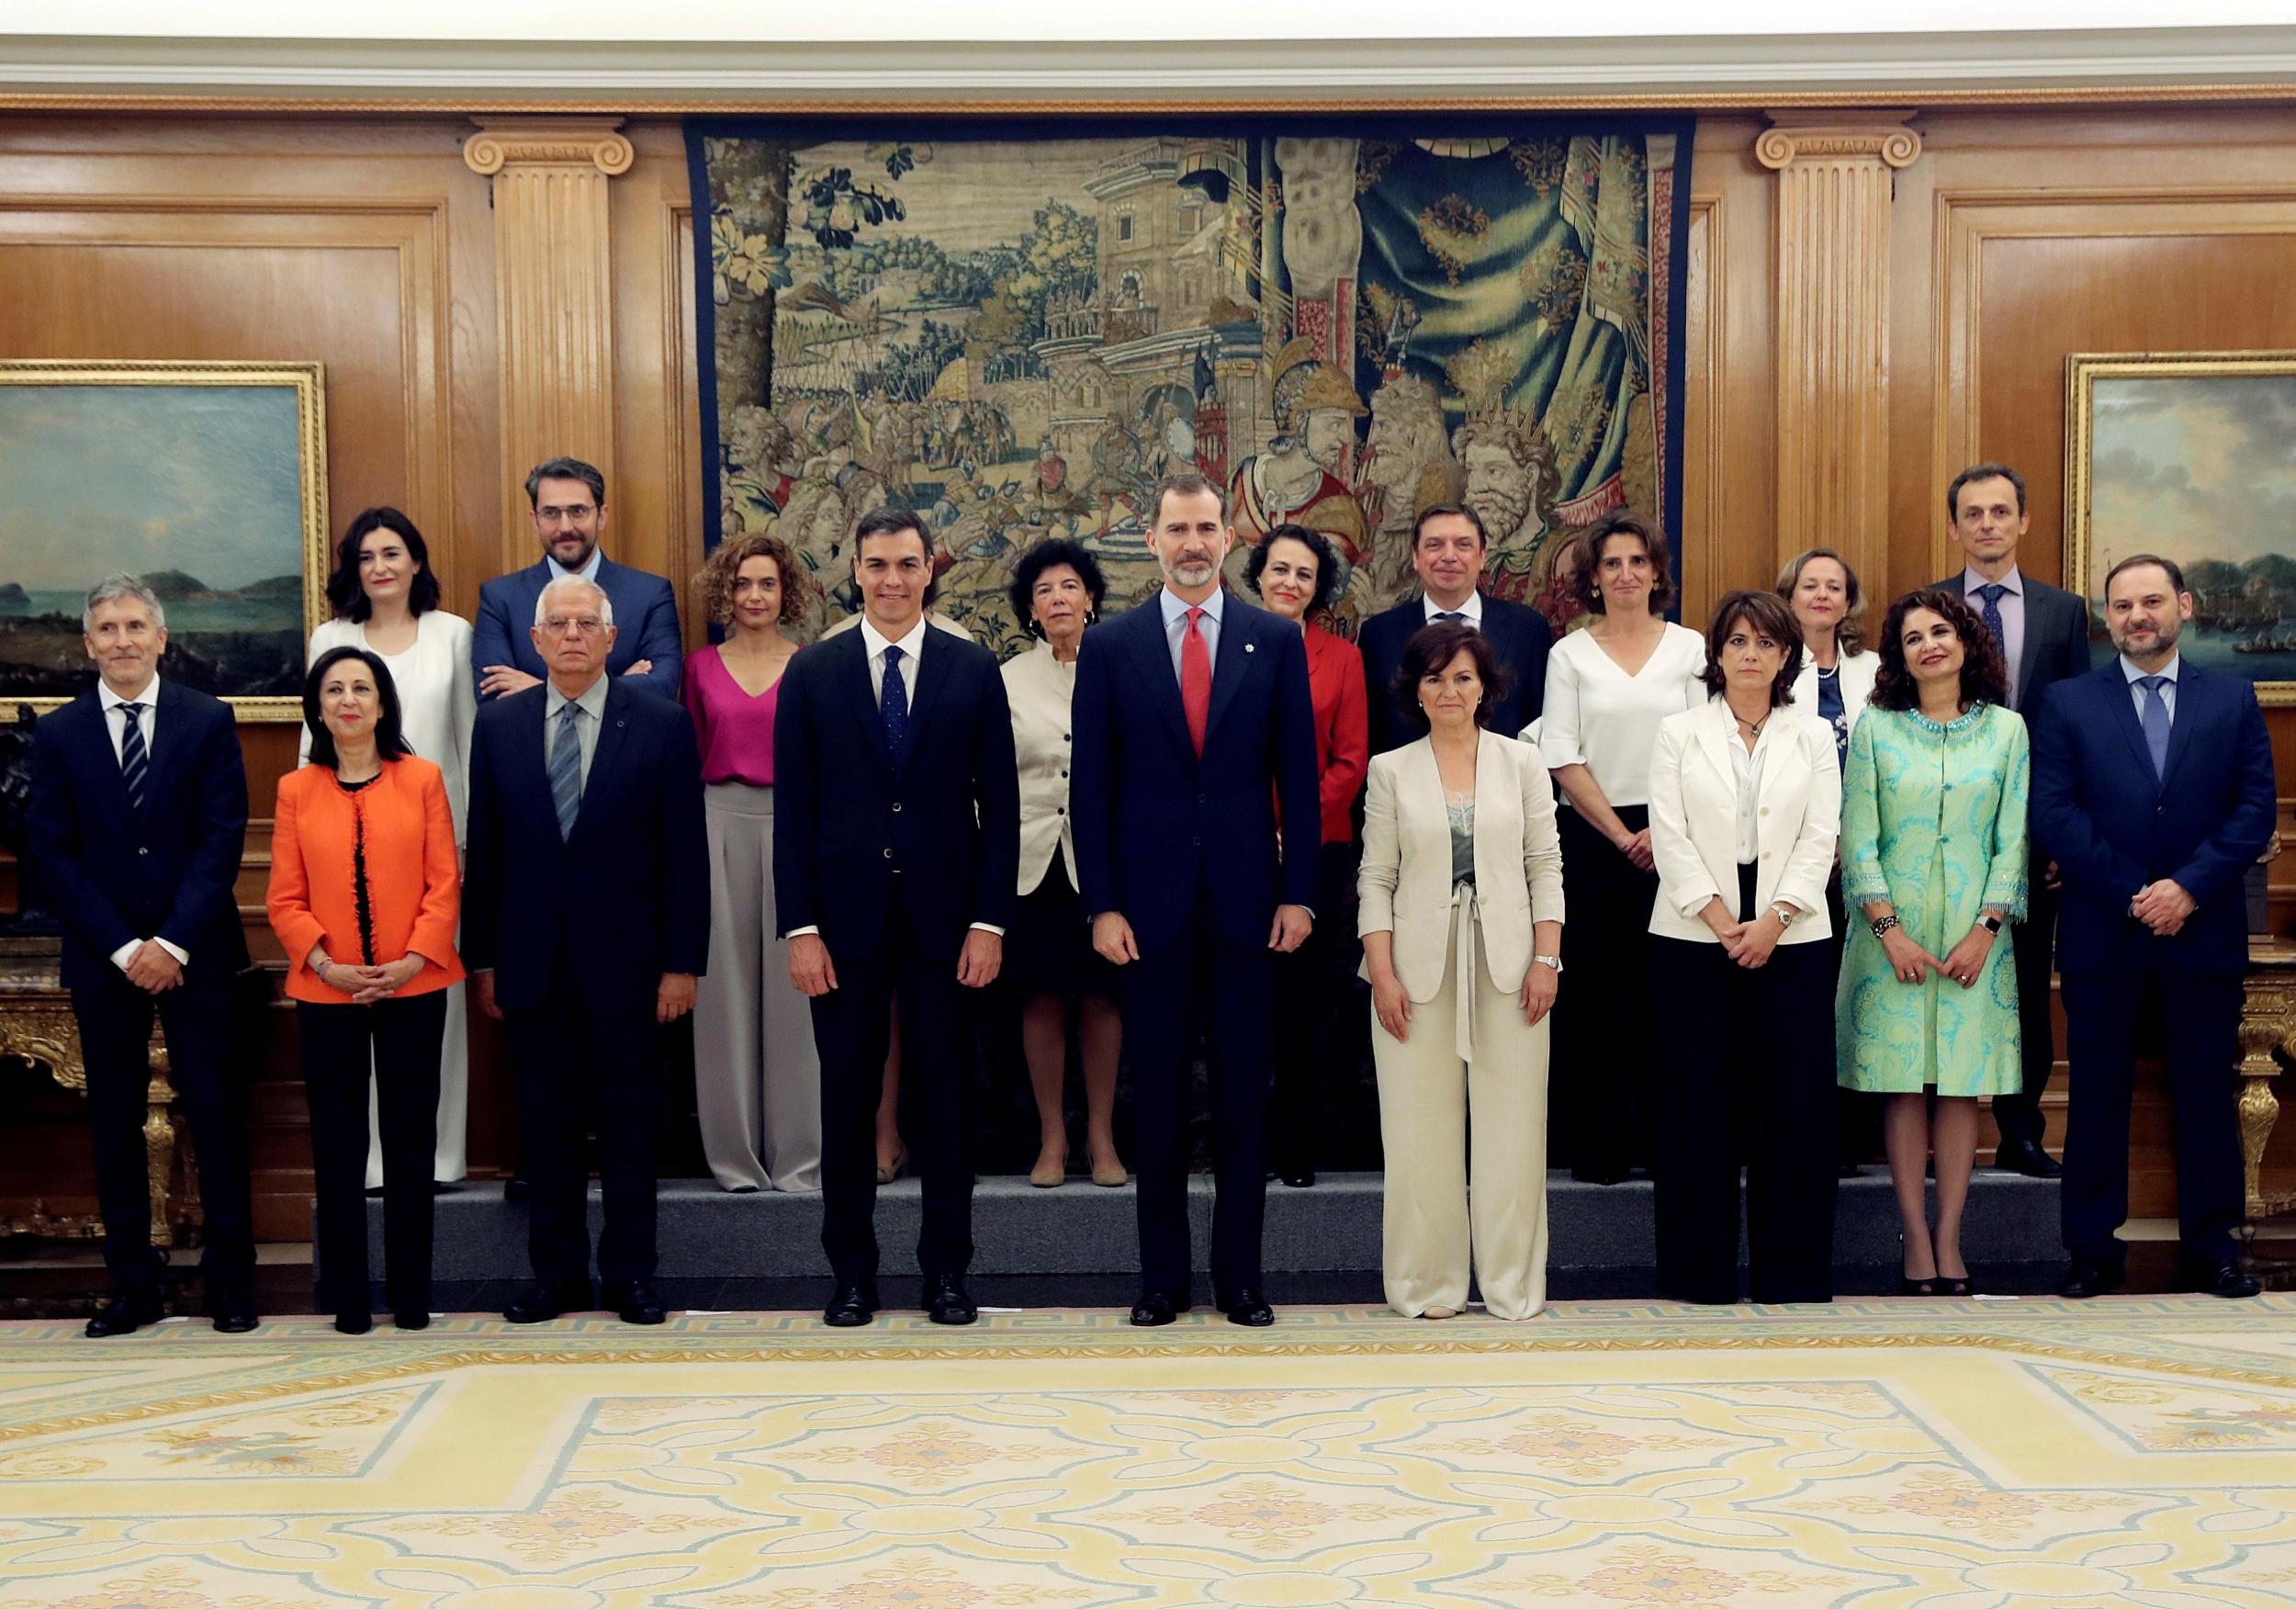 The new Spanish government's class photo, with more female ministers than ever before